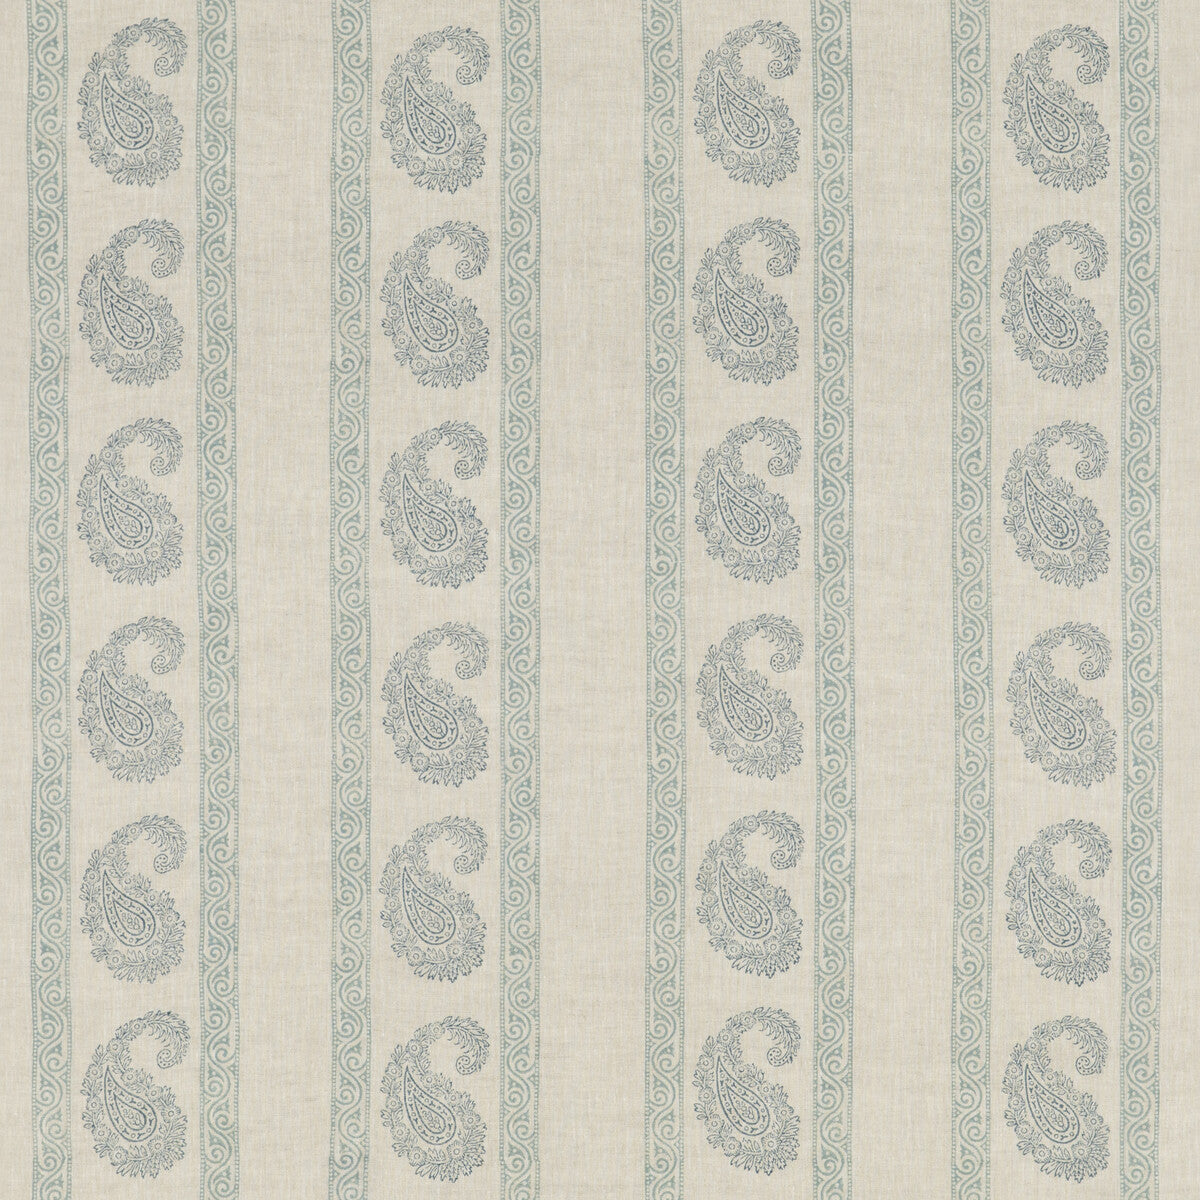 Vintage Paisley fabric in blue color - pattern BP10919.1.0 - by G P &amp; J Baker in the Portobello collection